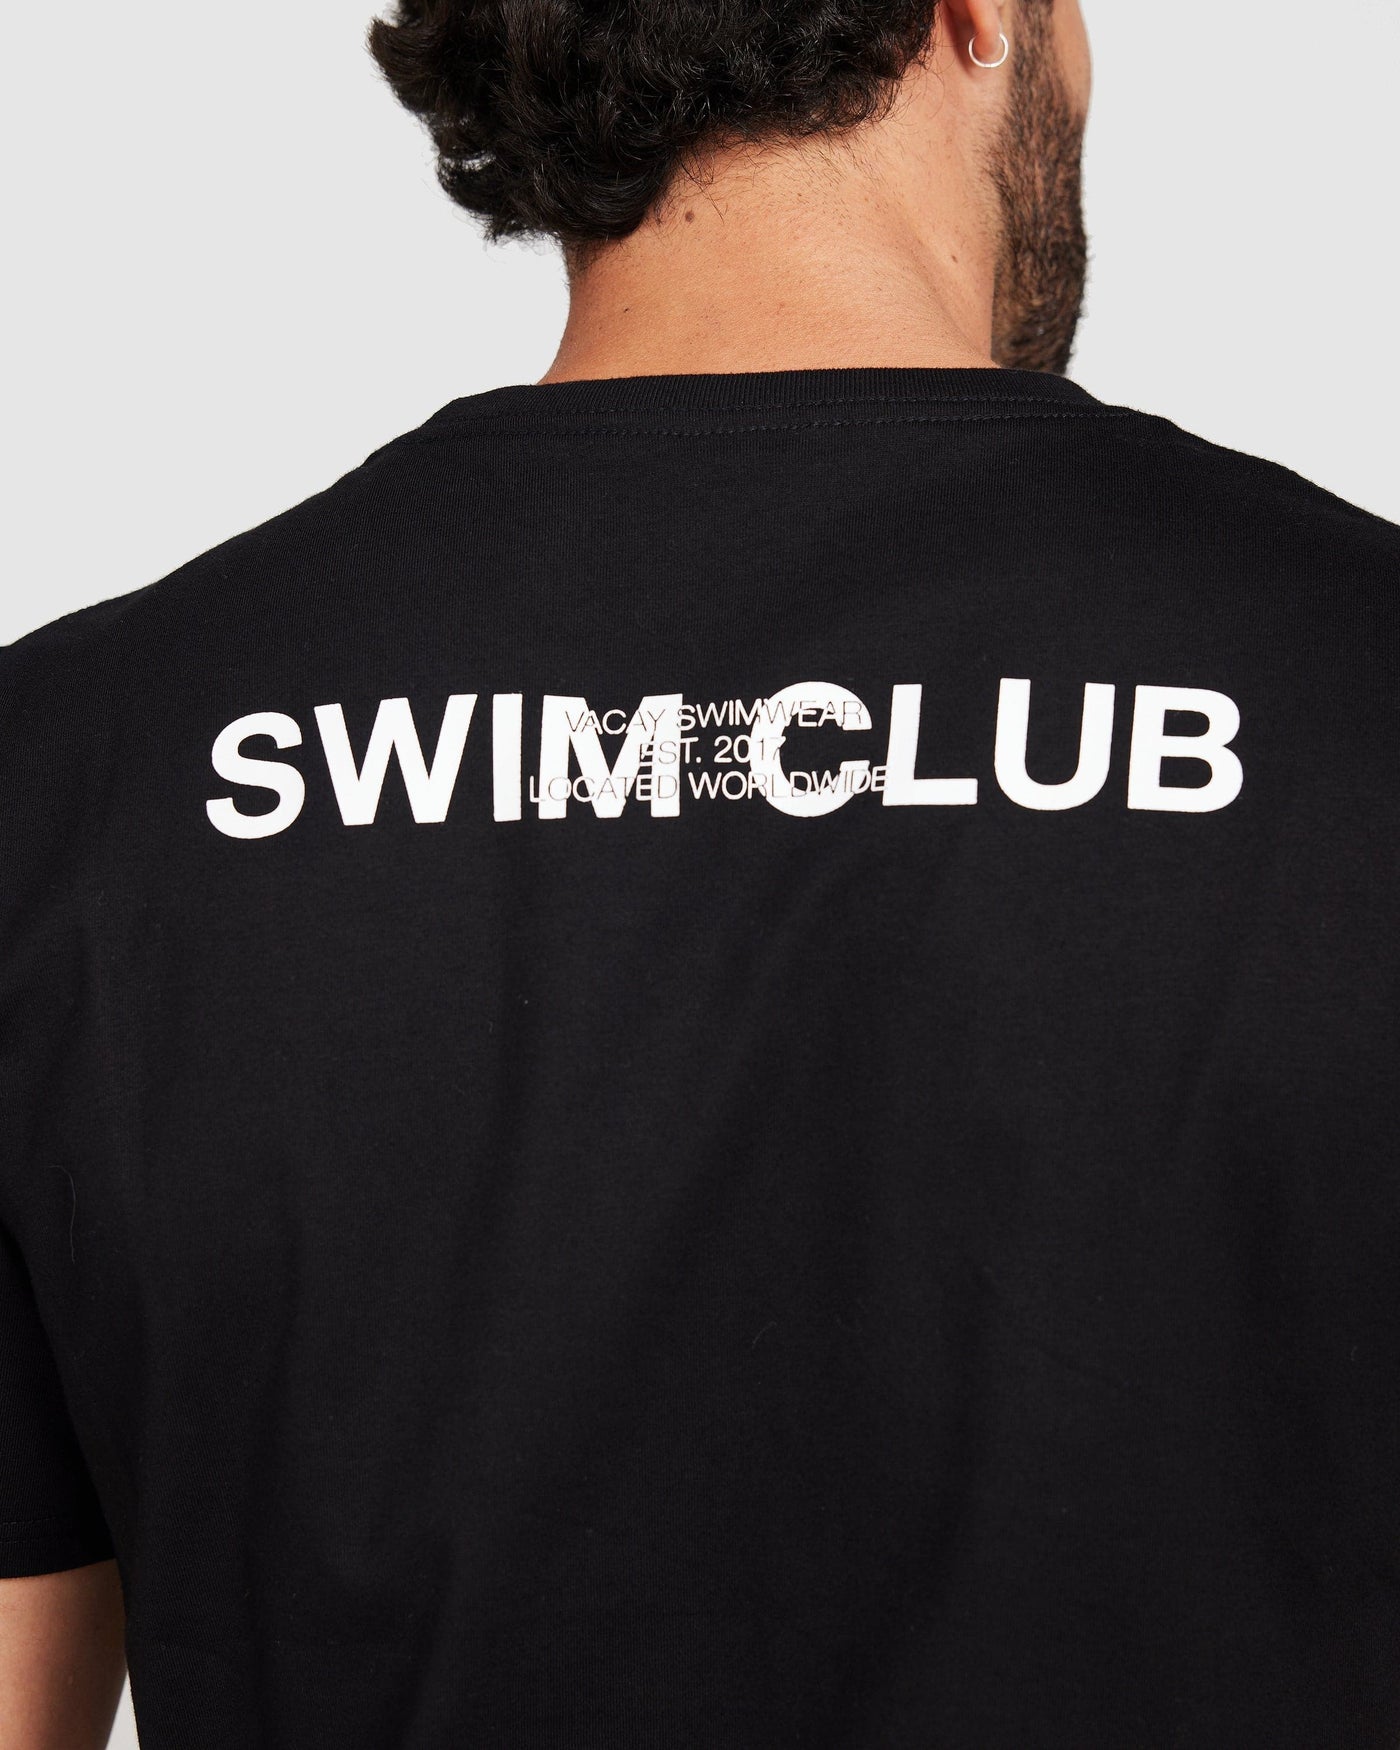 Members Only T-Shirt